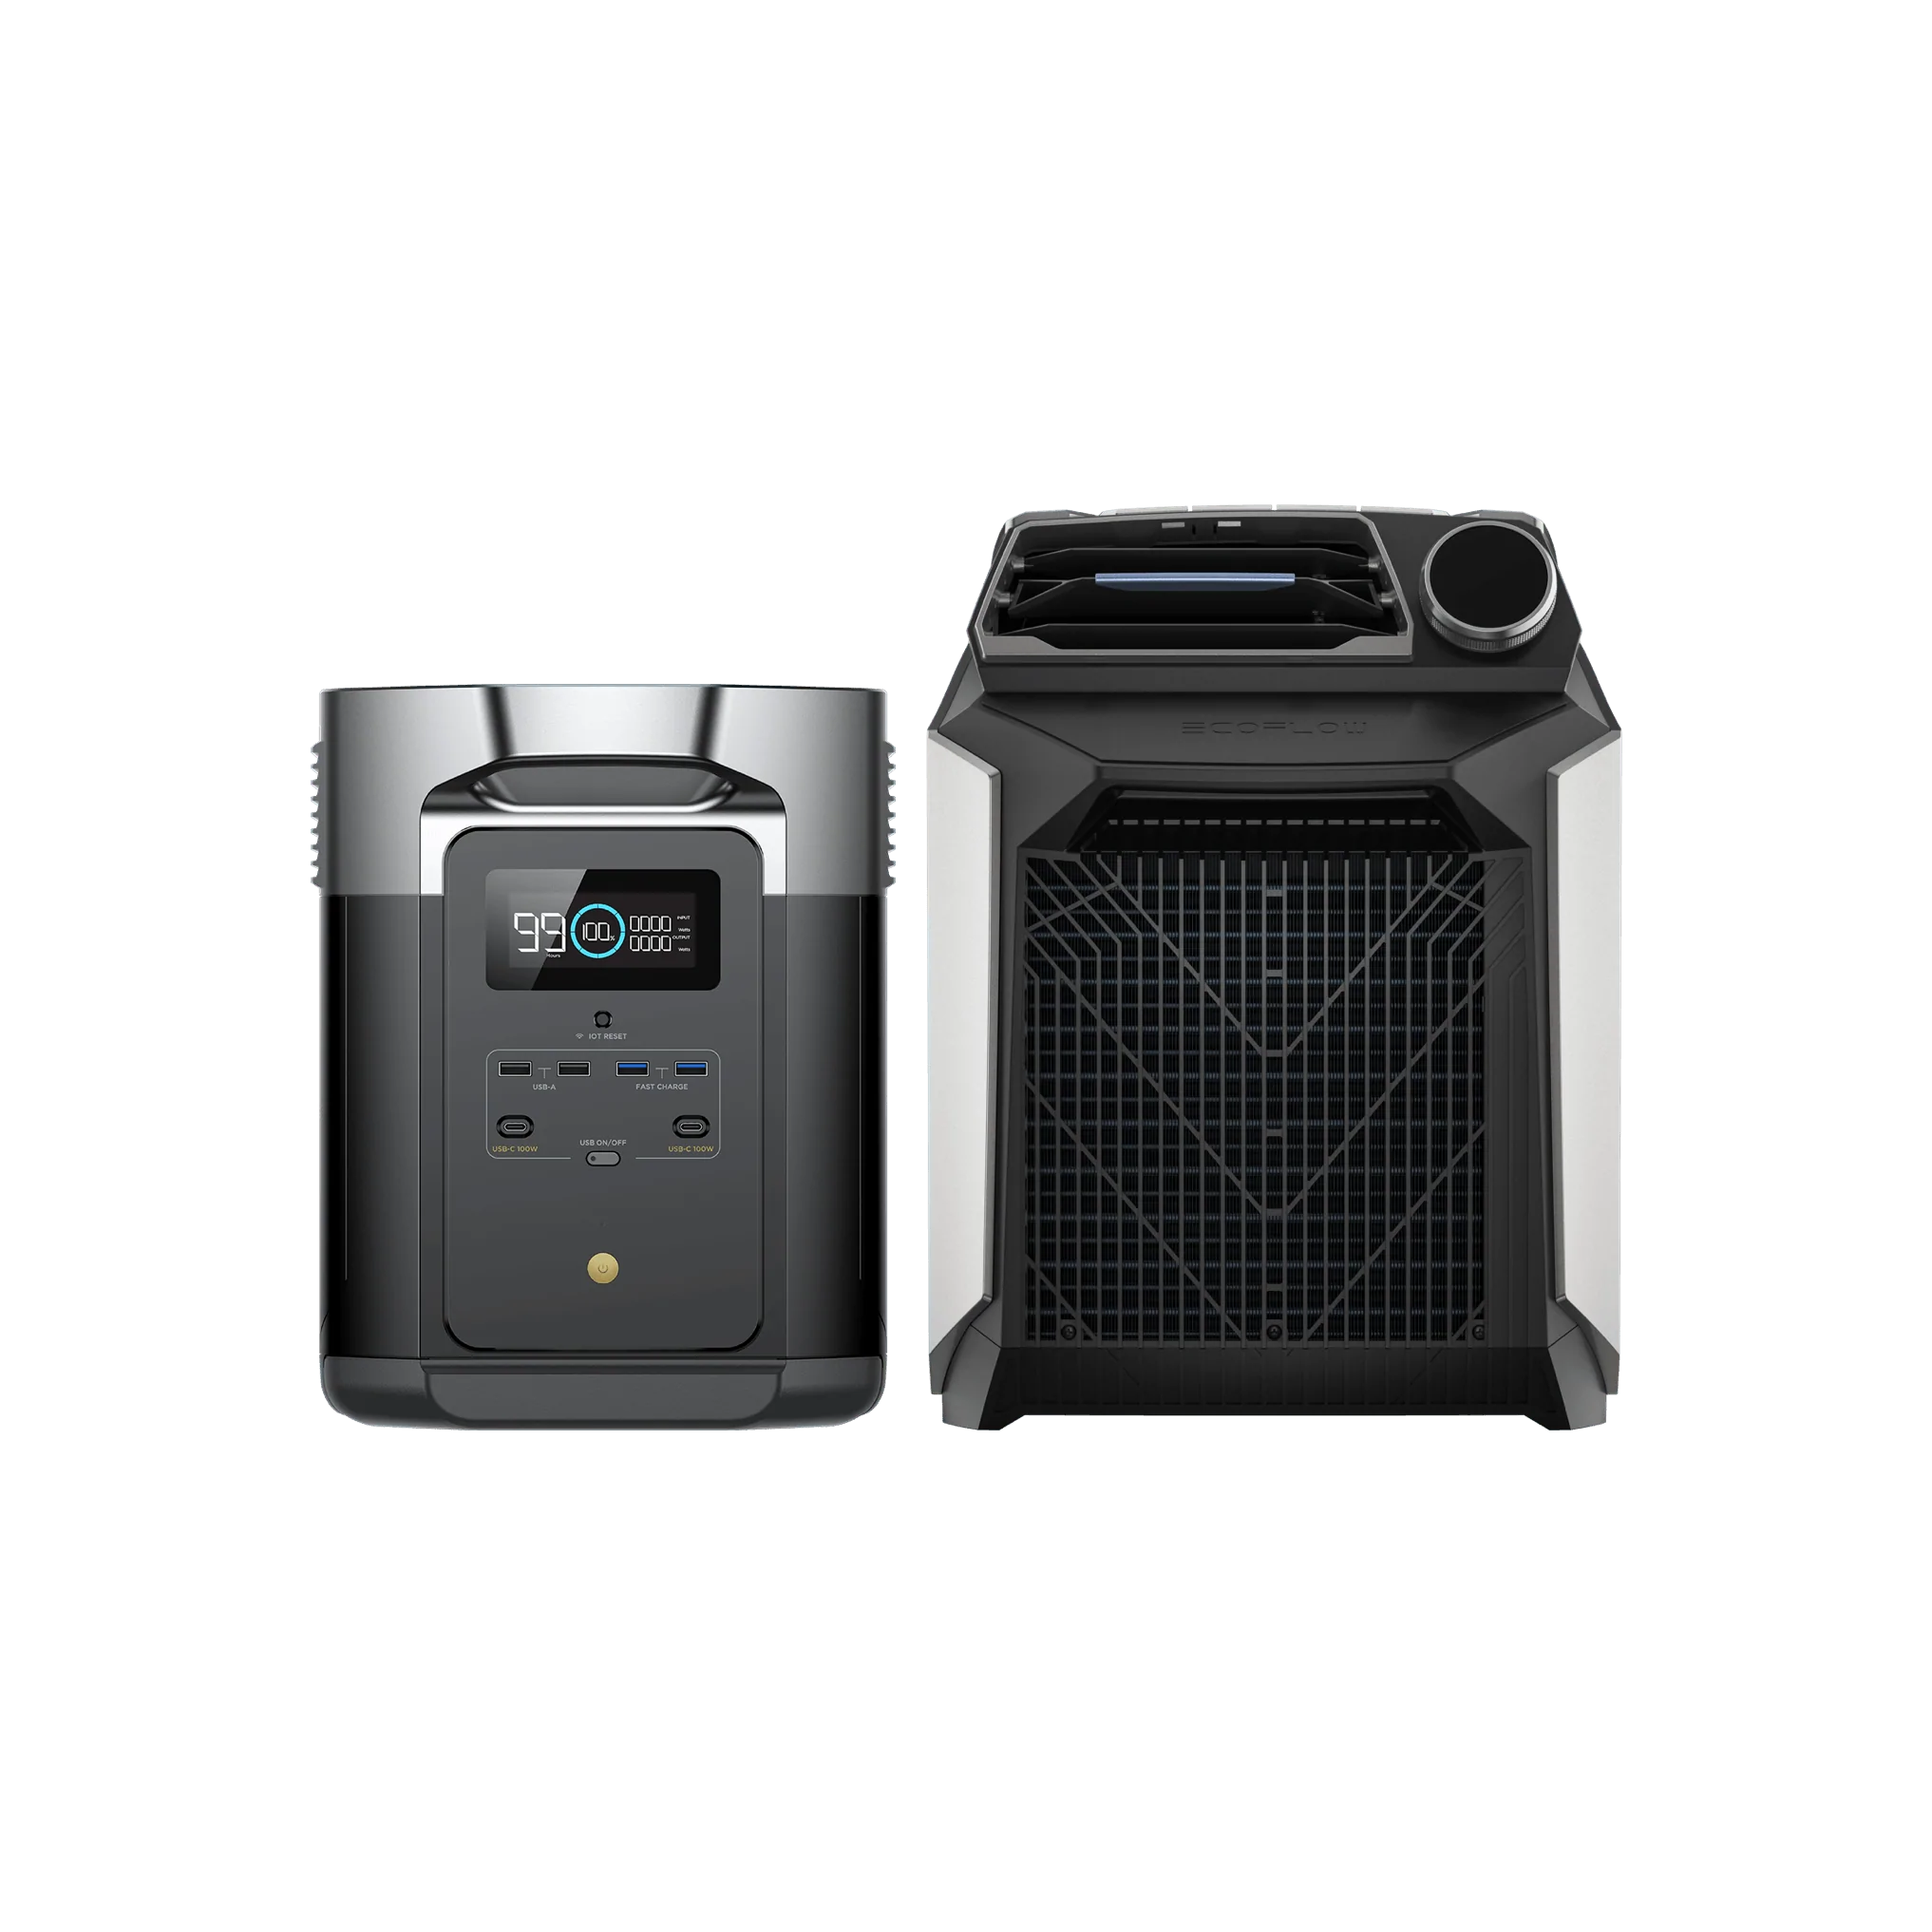 A portable air conditioner with remote control and silver design.